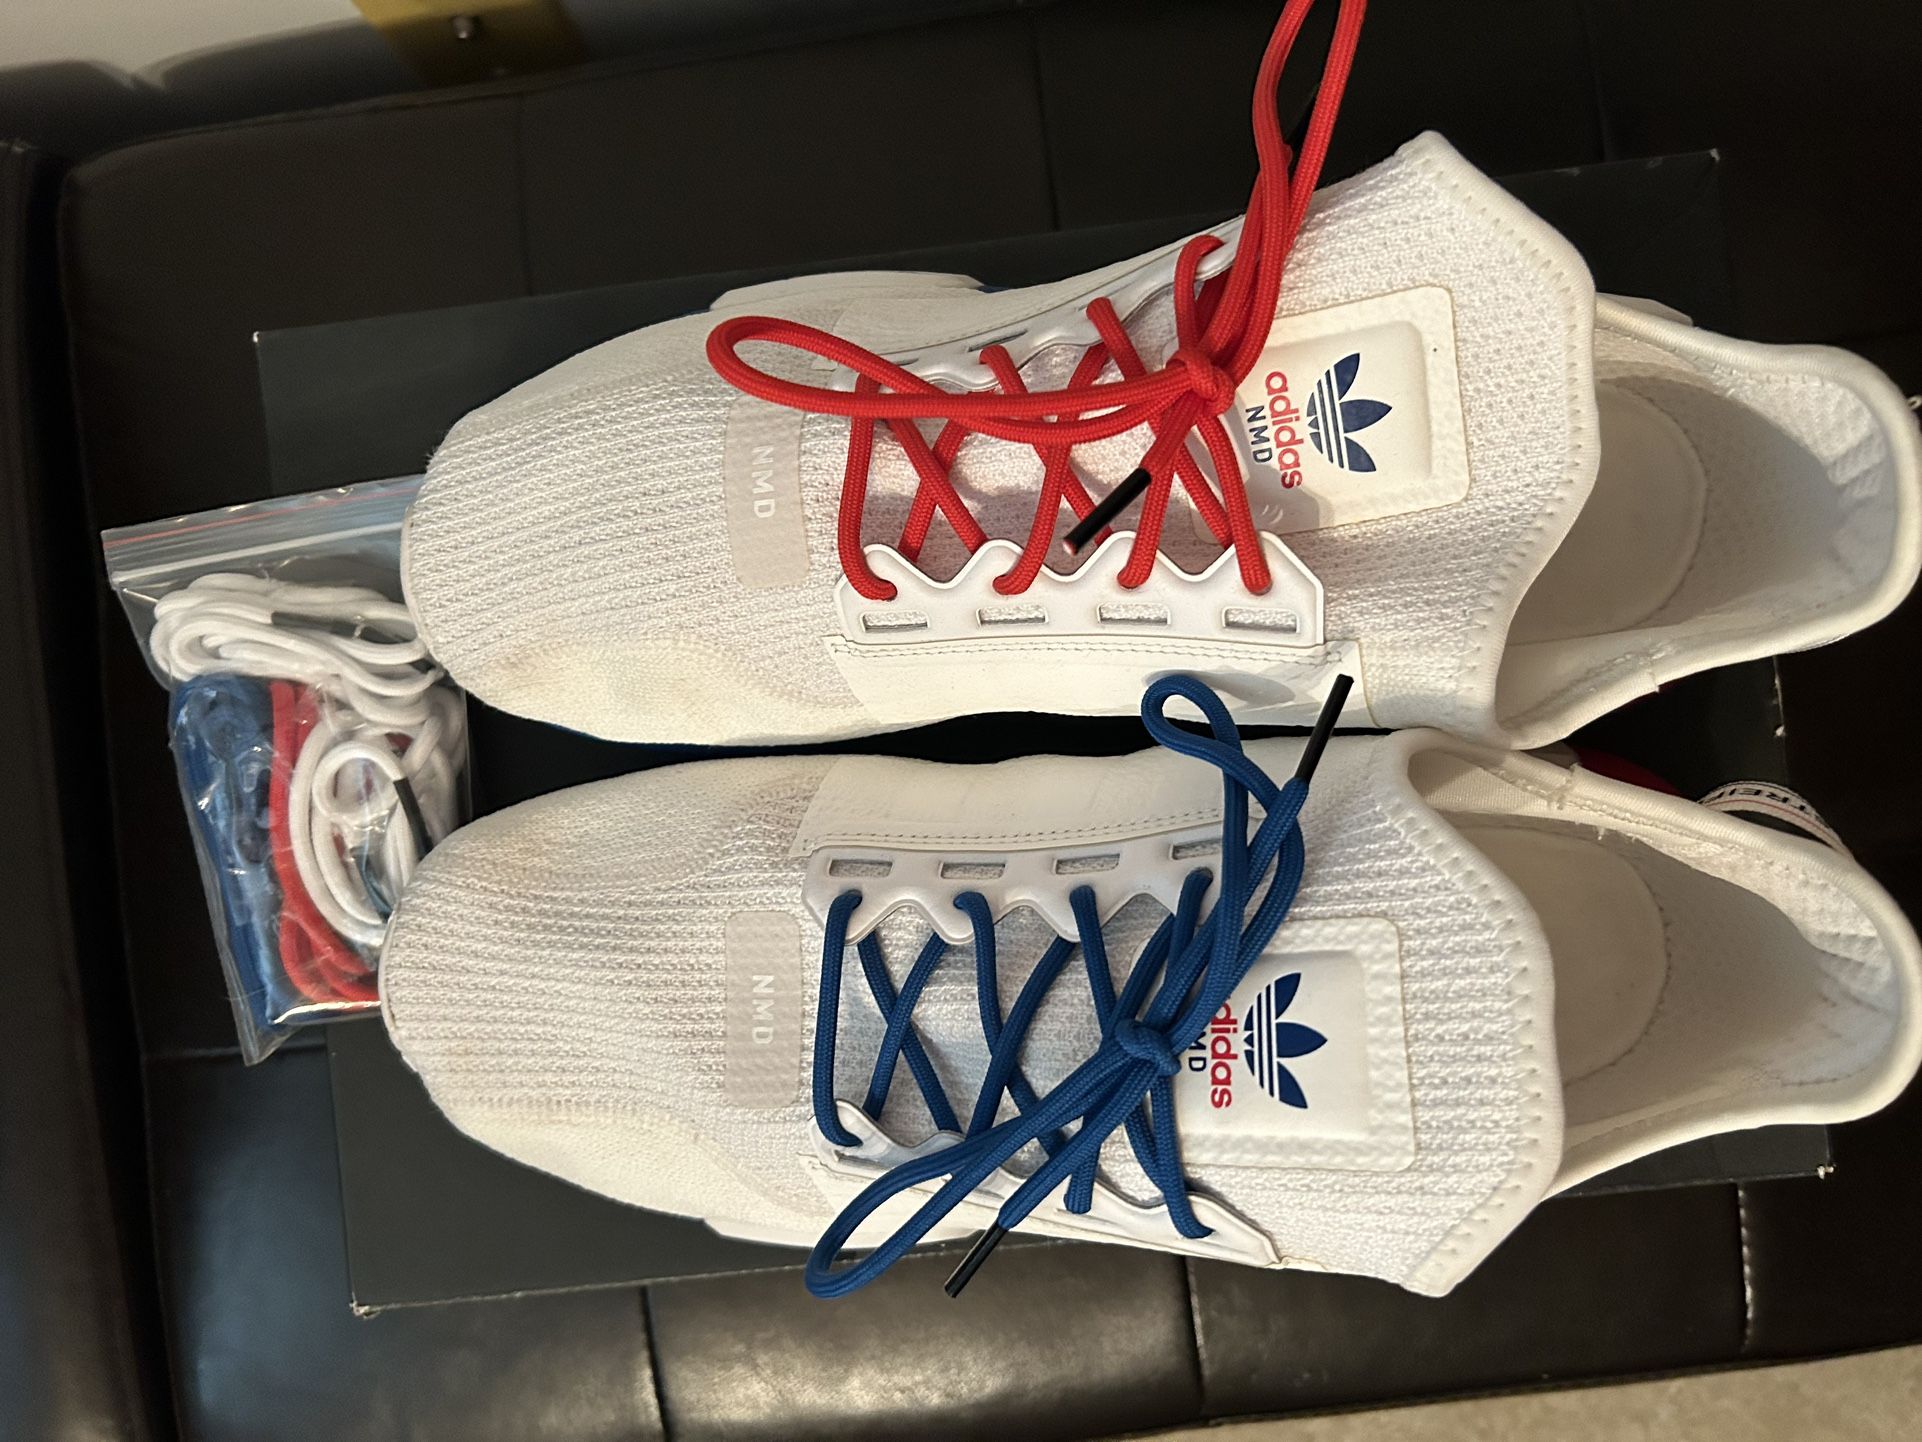 Adidas Red White And Blue NMD_R1.V2